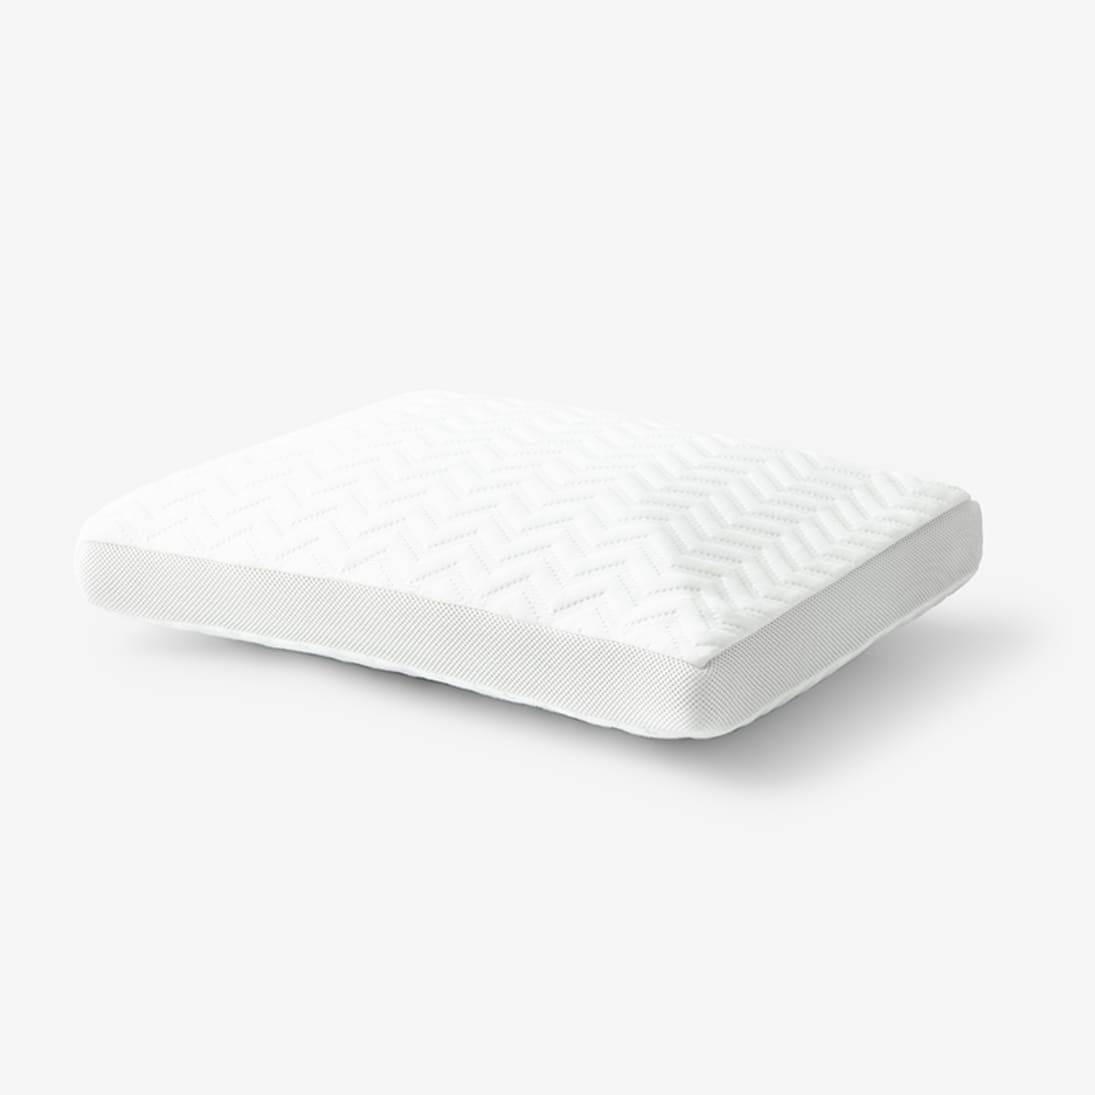 Contour Cloud Bed Pillow Keep Cool & Dry on Memory Foam Pillow. Air Edition 